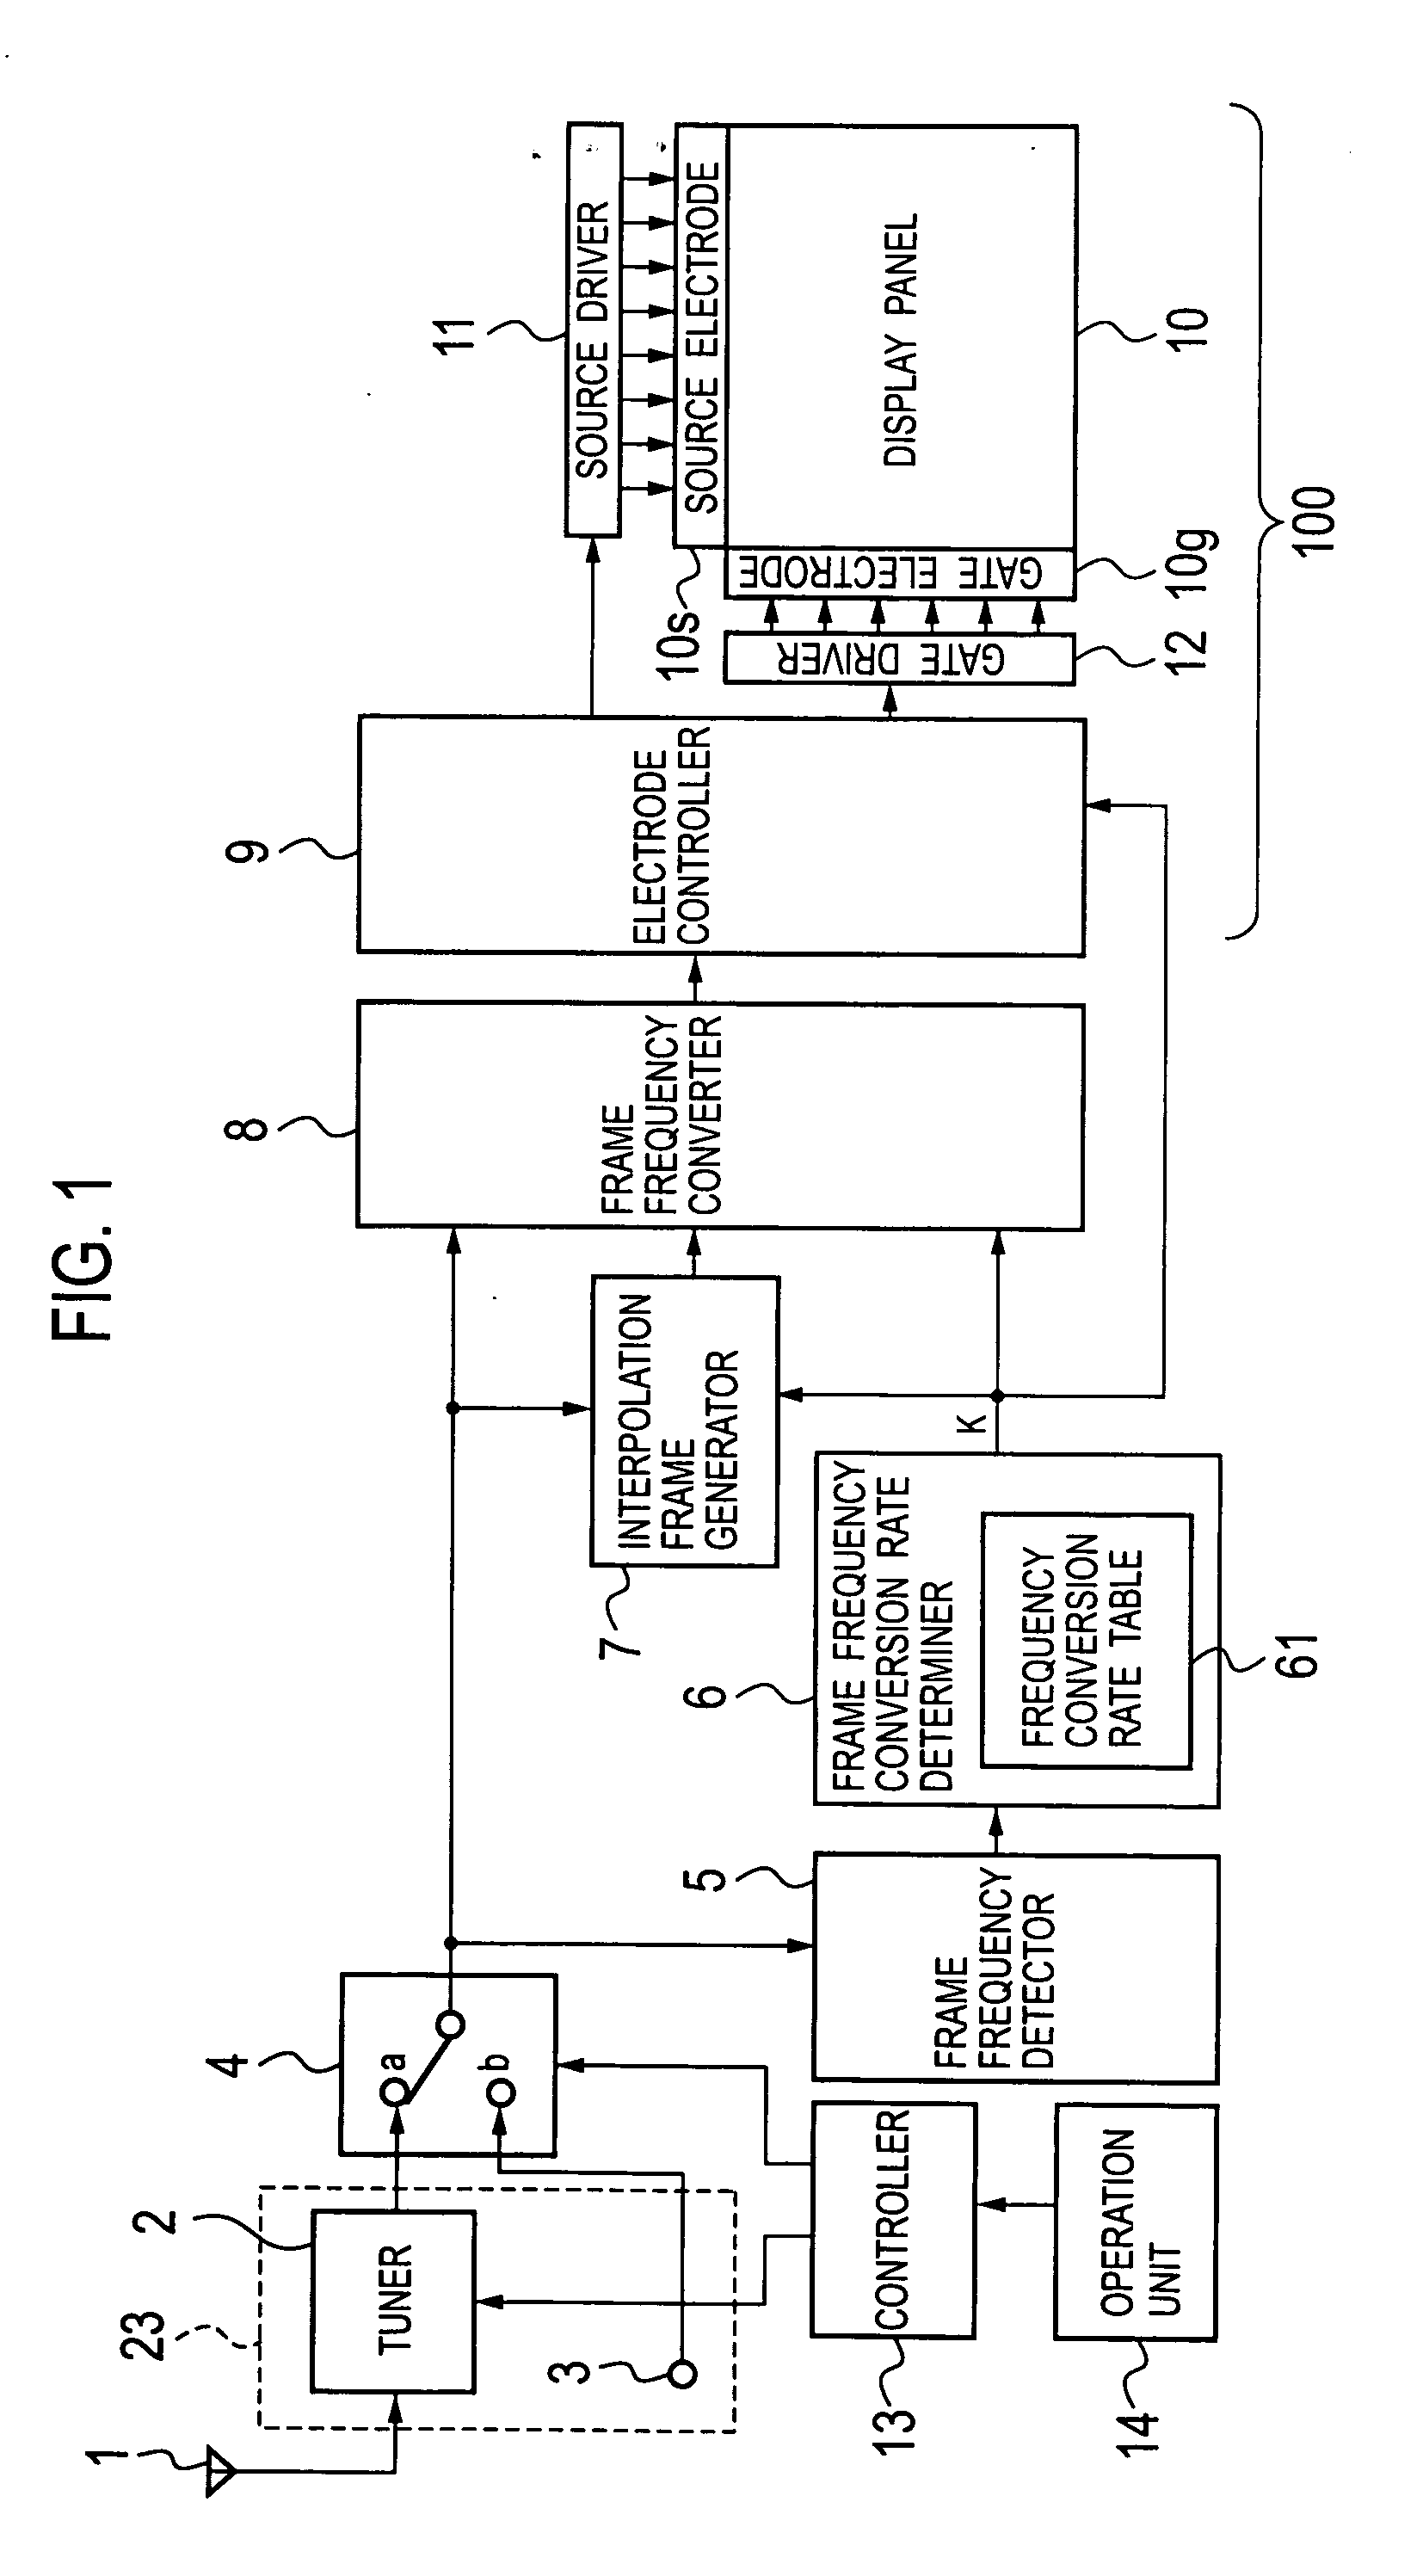 Apparatus for and method of displaying video signals